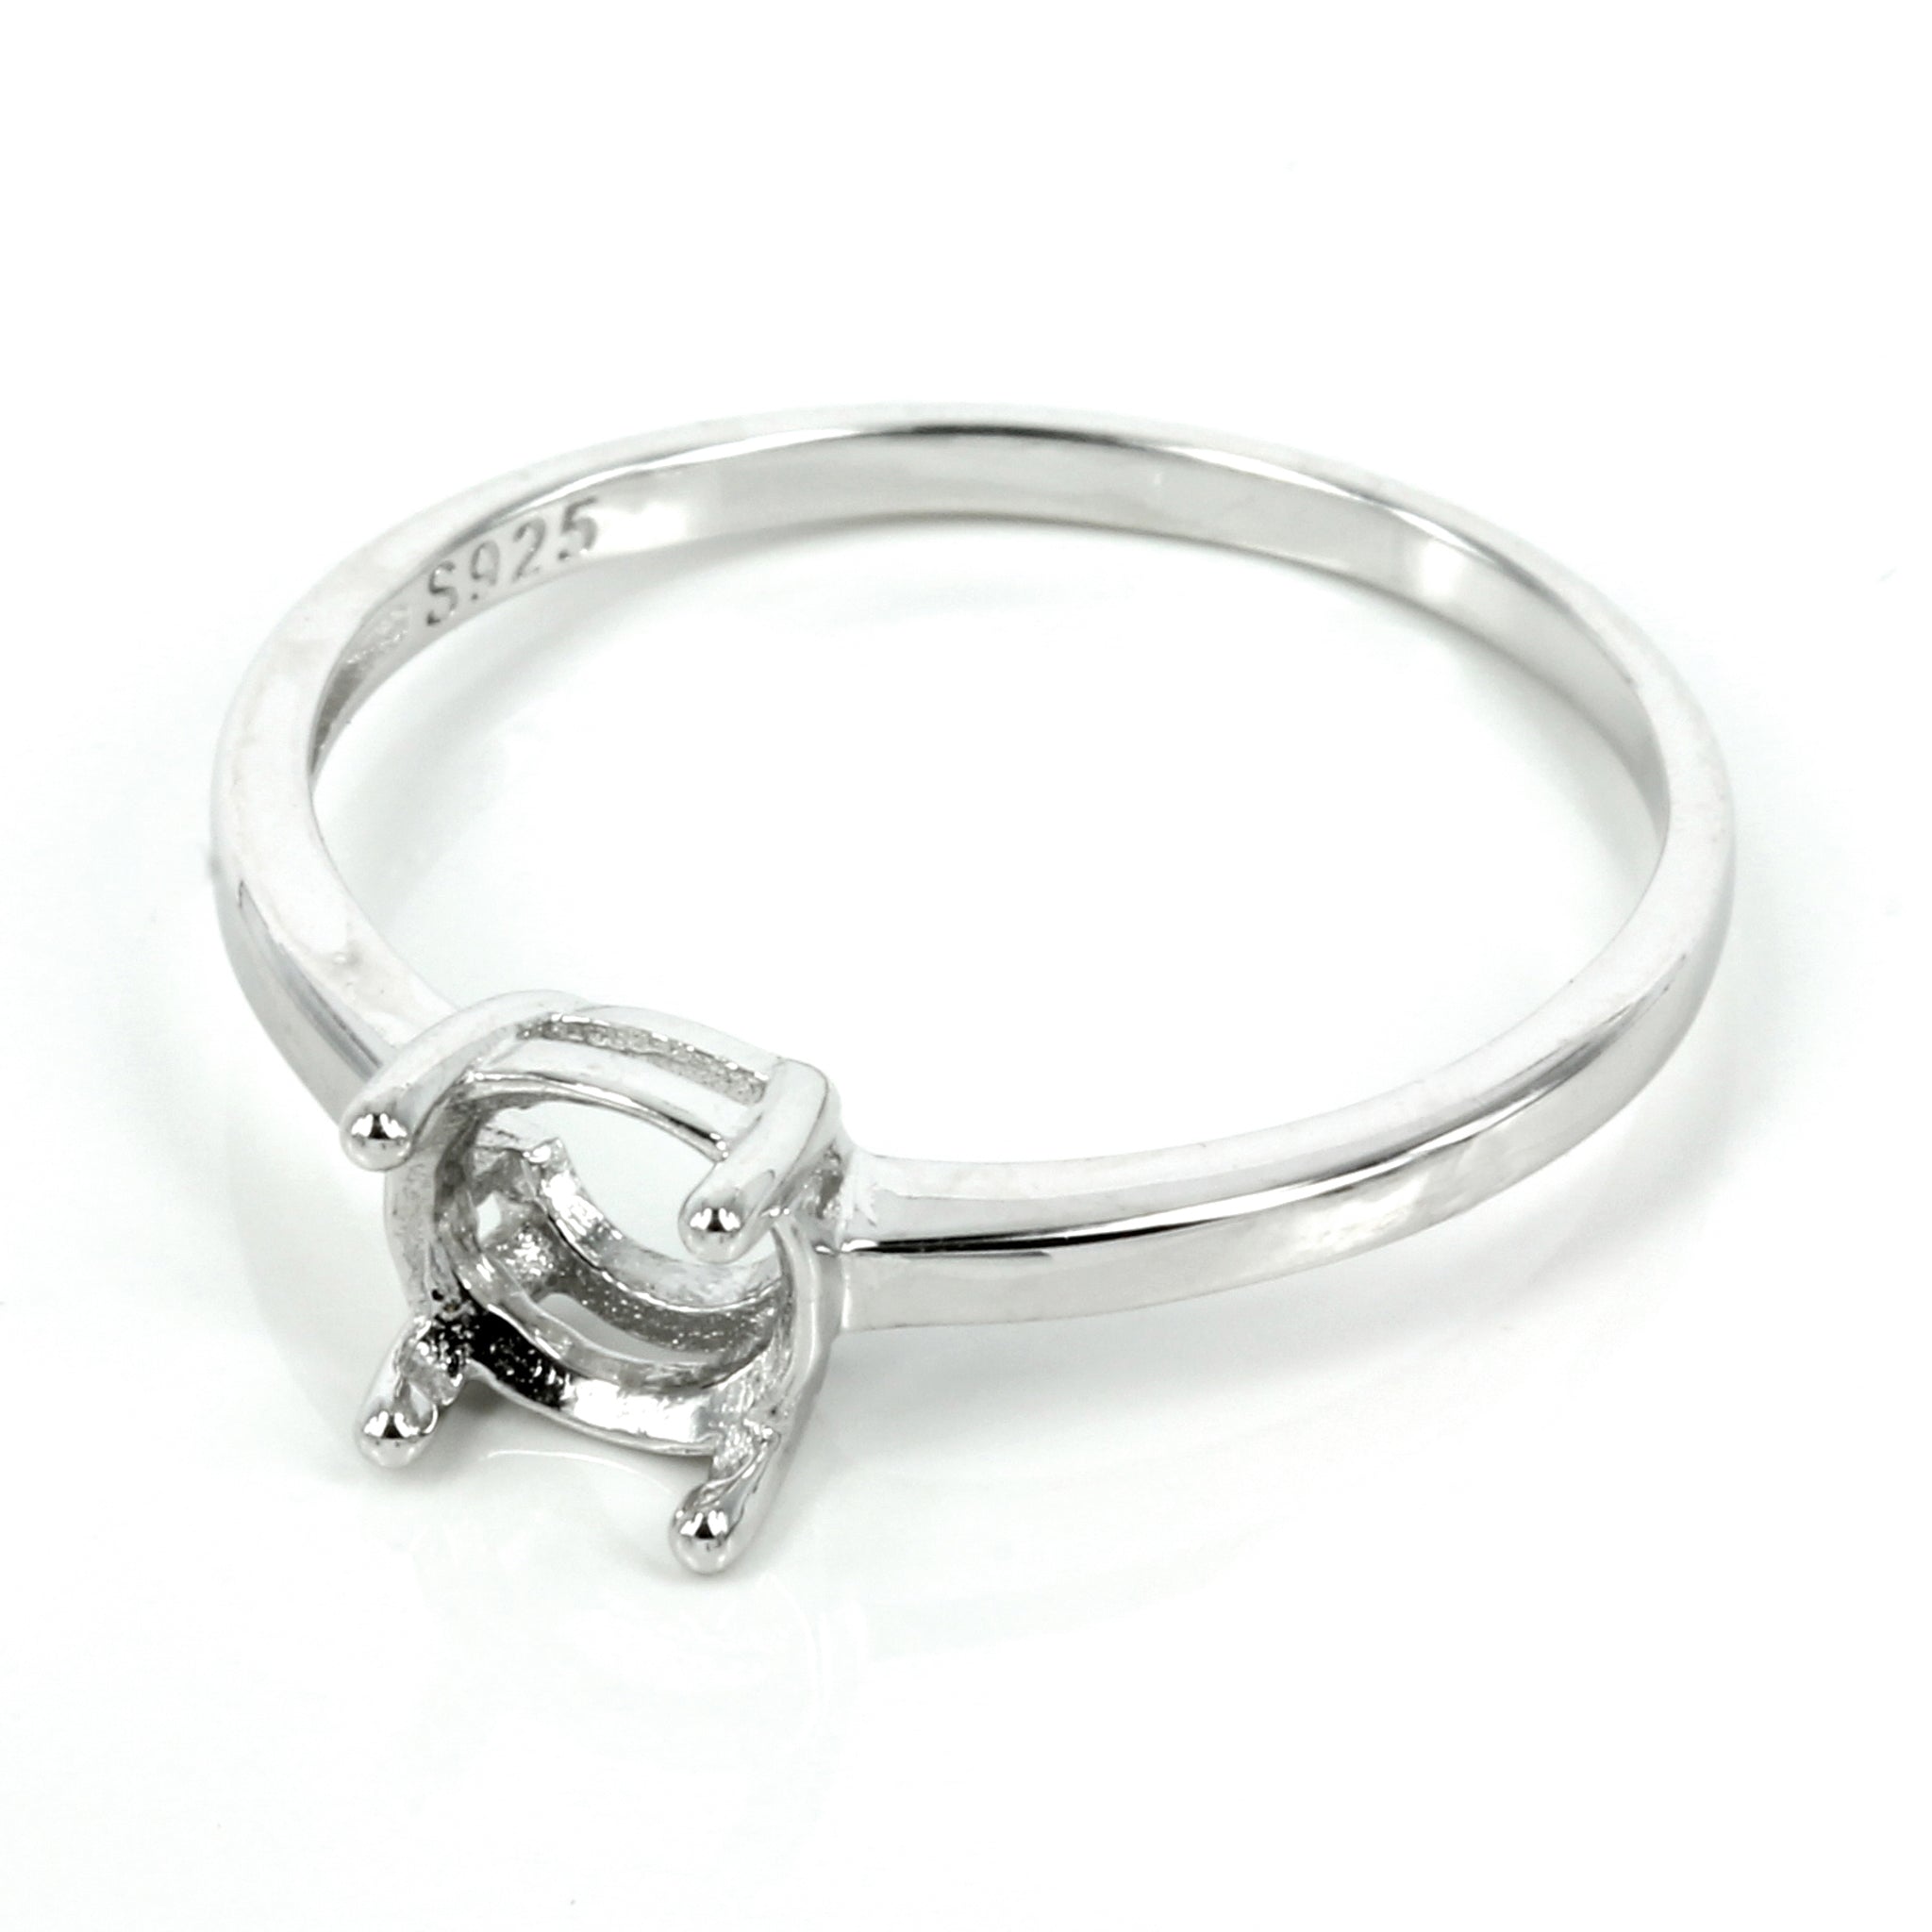 Classic Basket Setting Ring in Sterling Silver for 6.5mm Round Stones